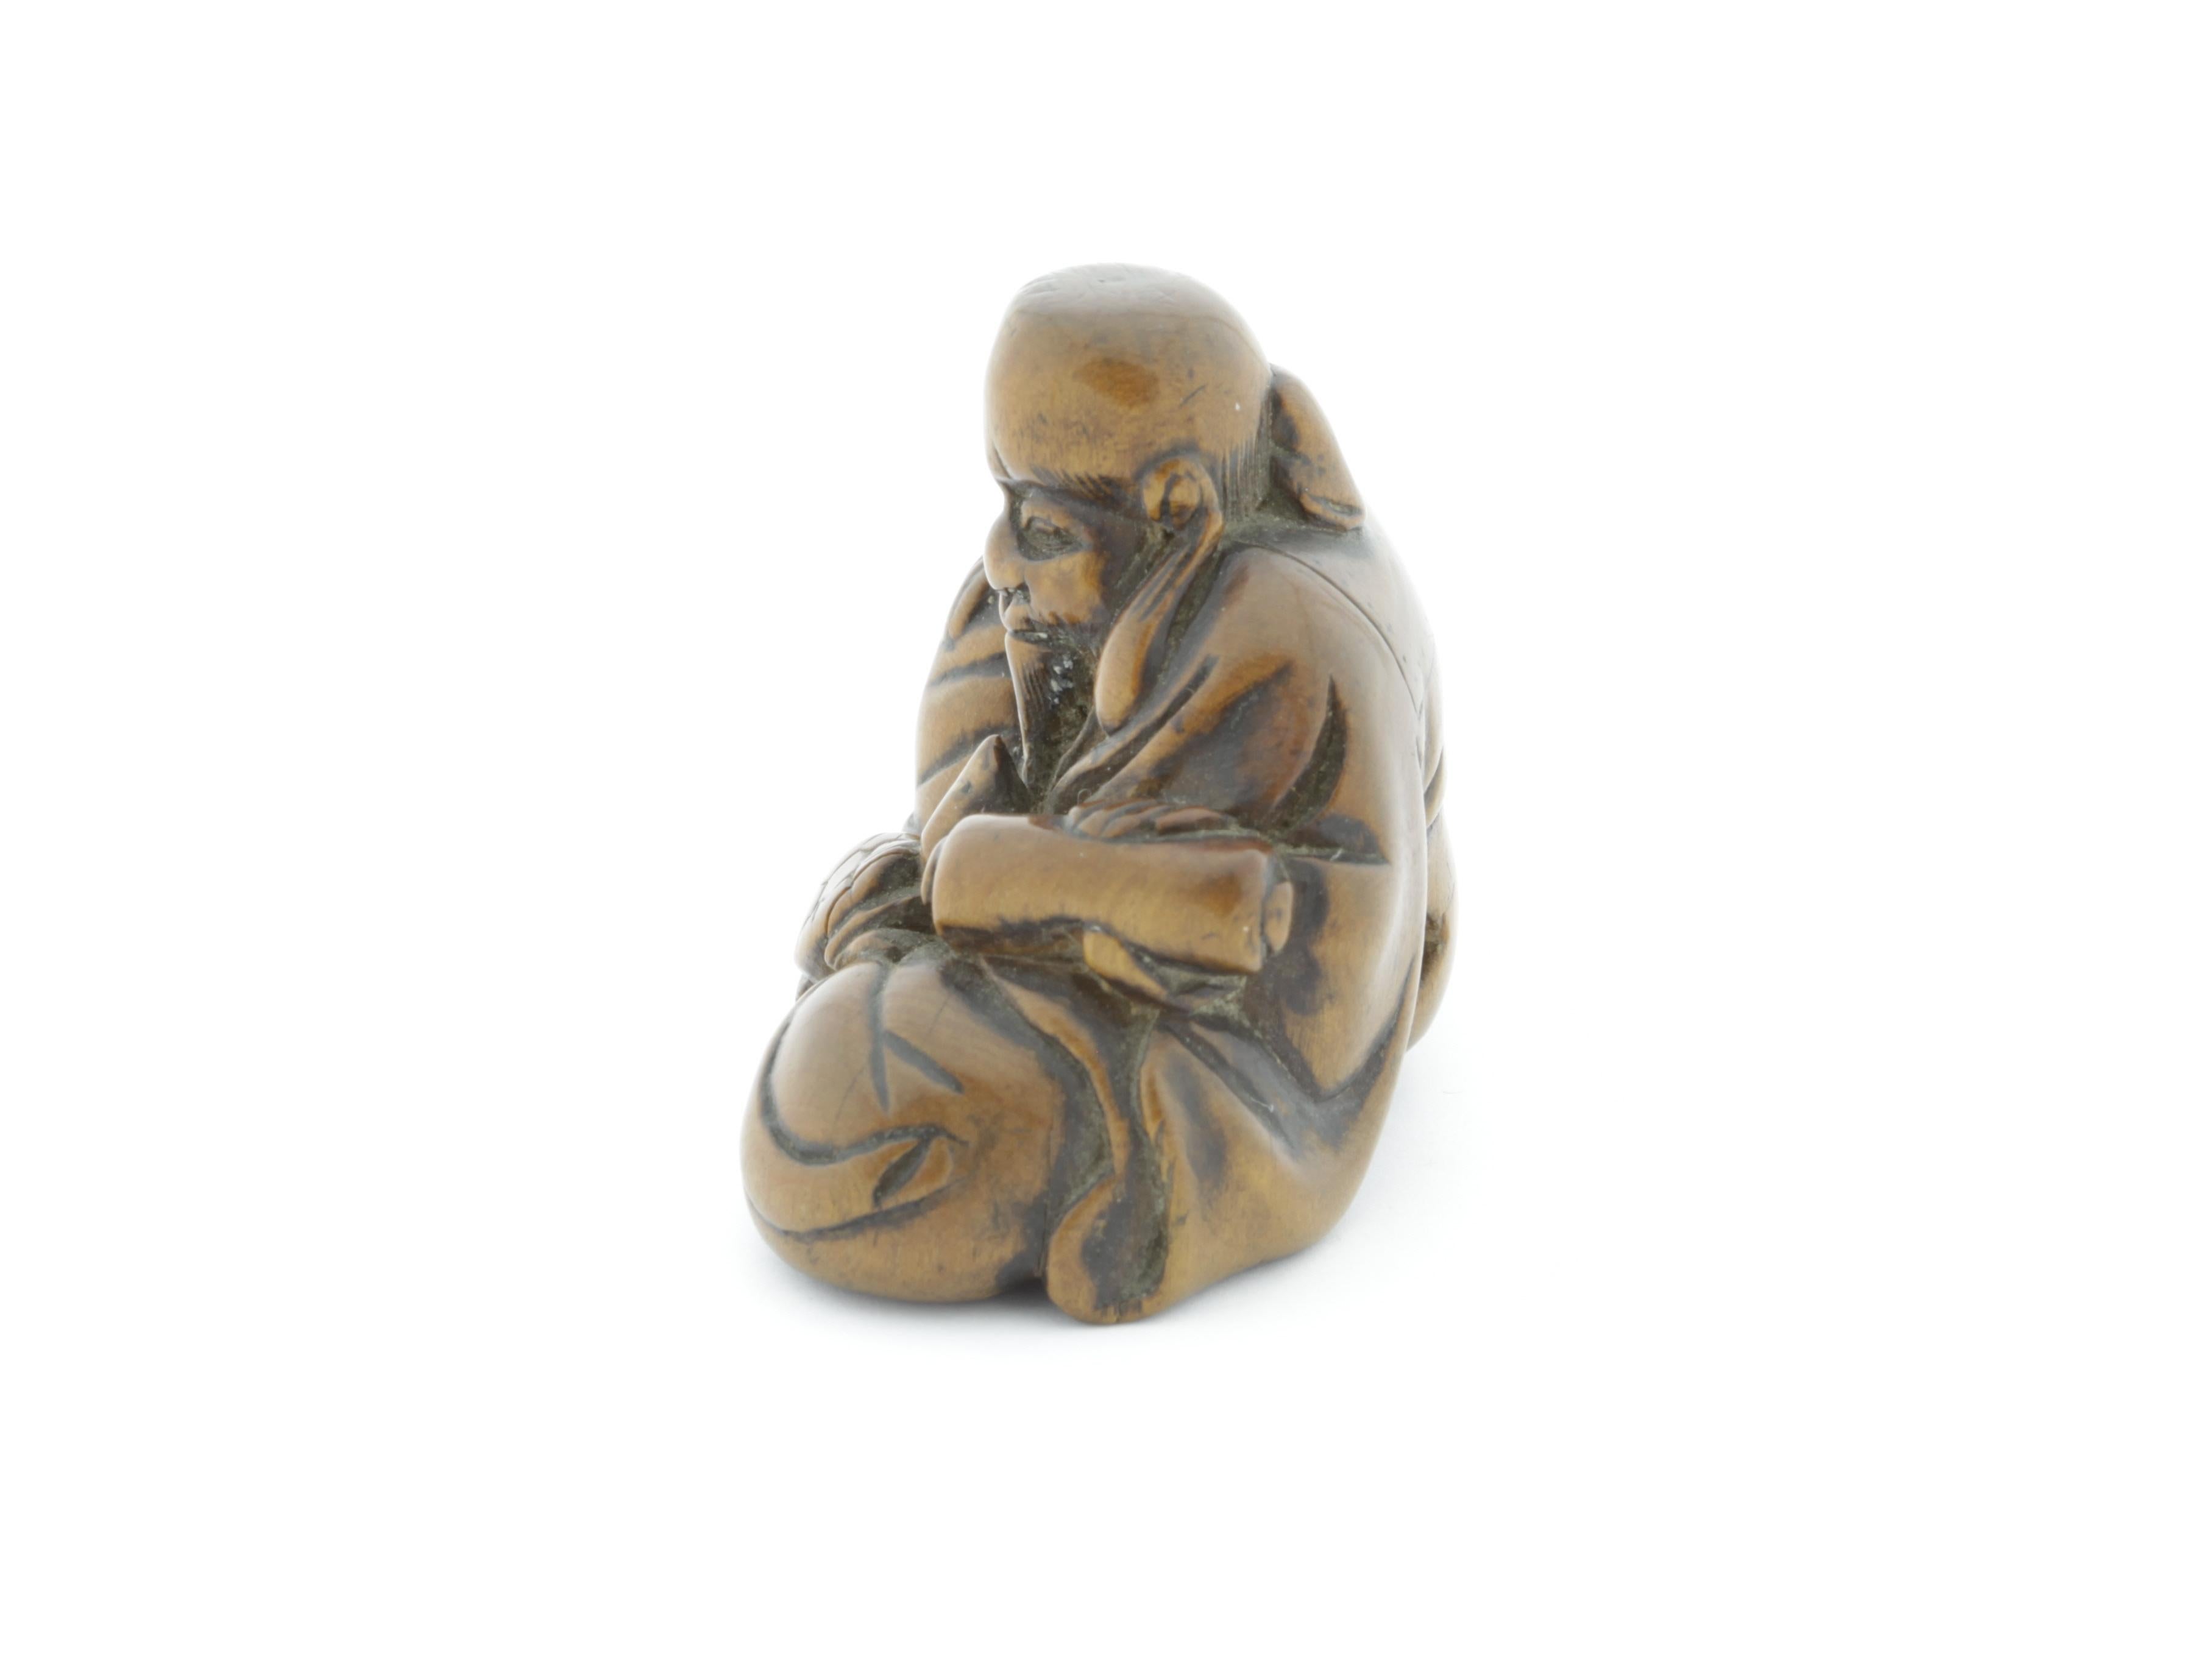  Netsuke, Wood, Accessory, Fashion, 19th Century, Antique, Woodcraft, Charm - Other Art Style Art by Unknown